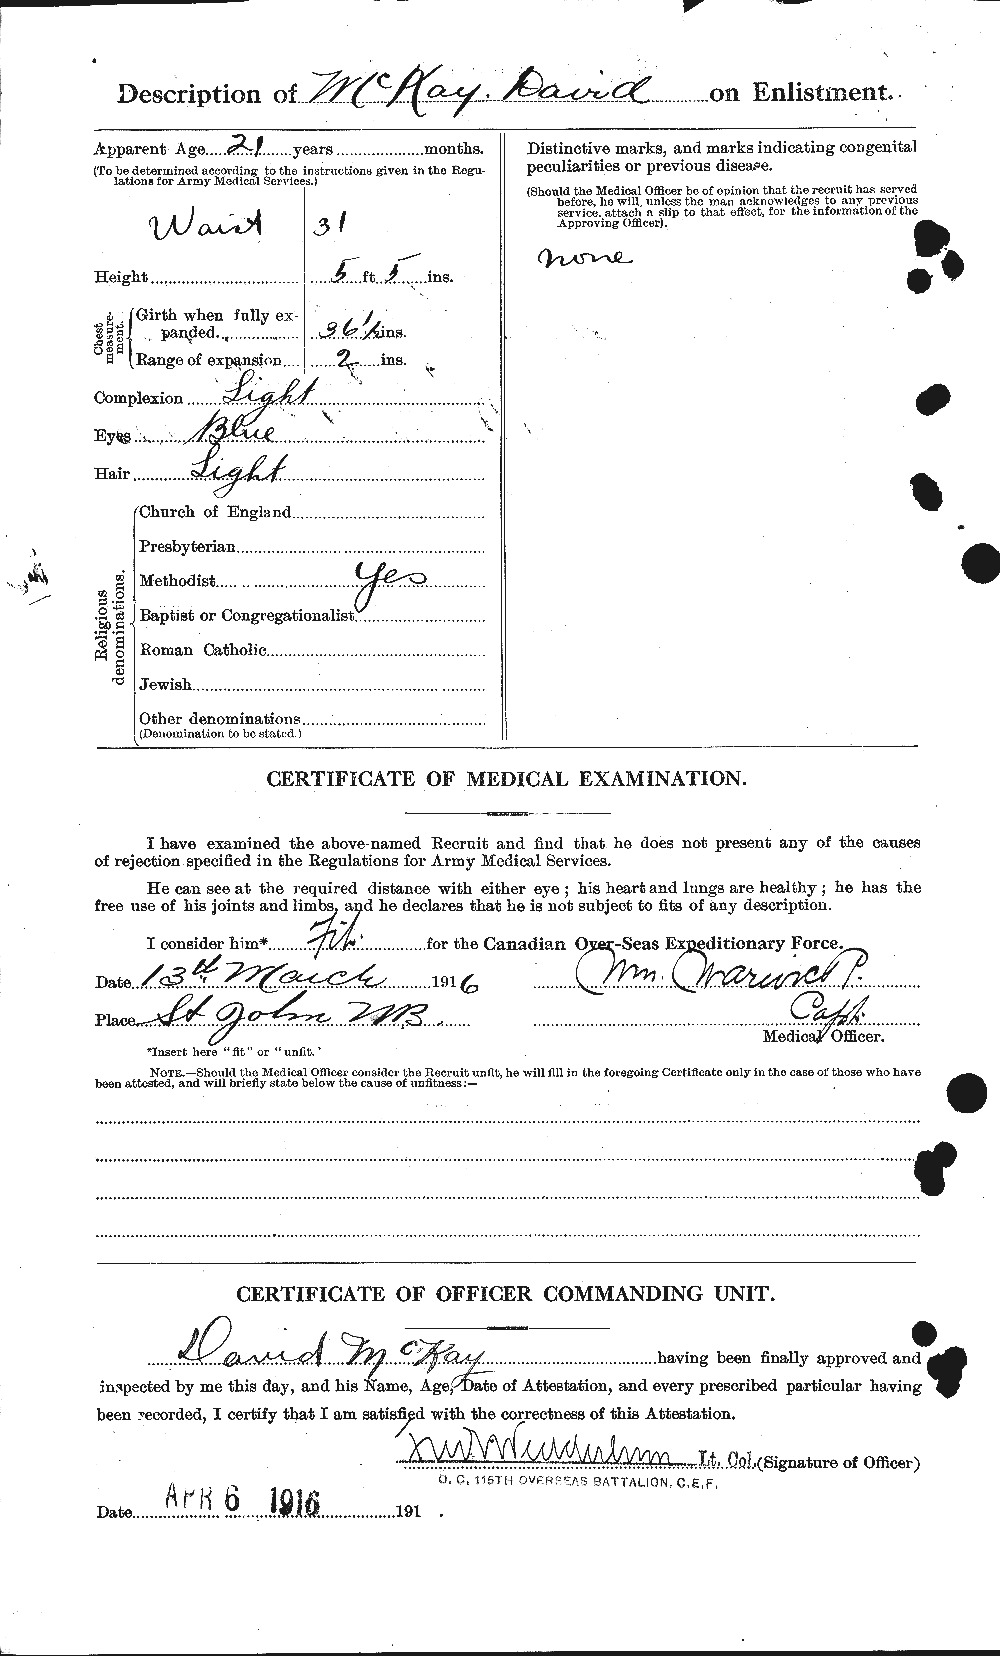 Personnel Records of the First World War - CEF 531134b